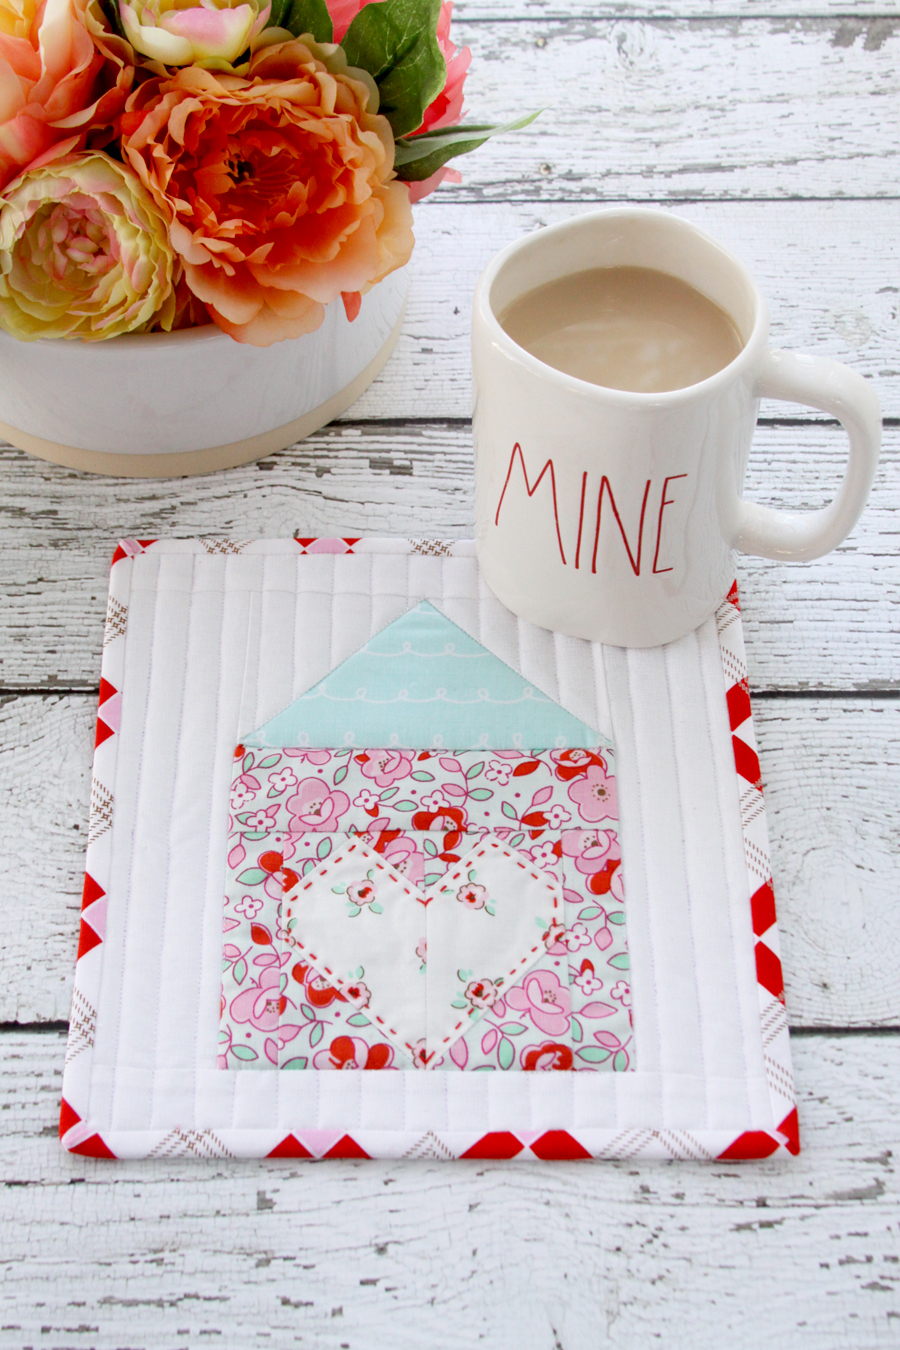 Heart and Home Mug Rug or Mini Quilt